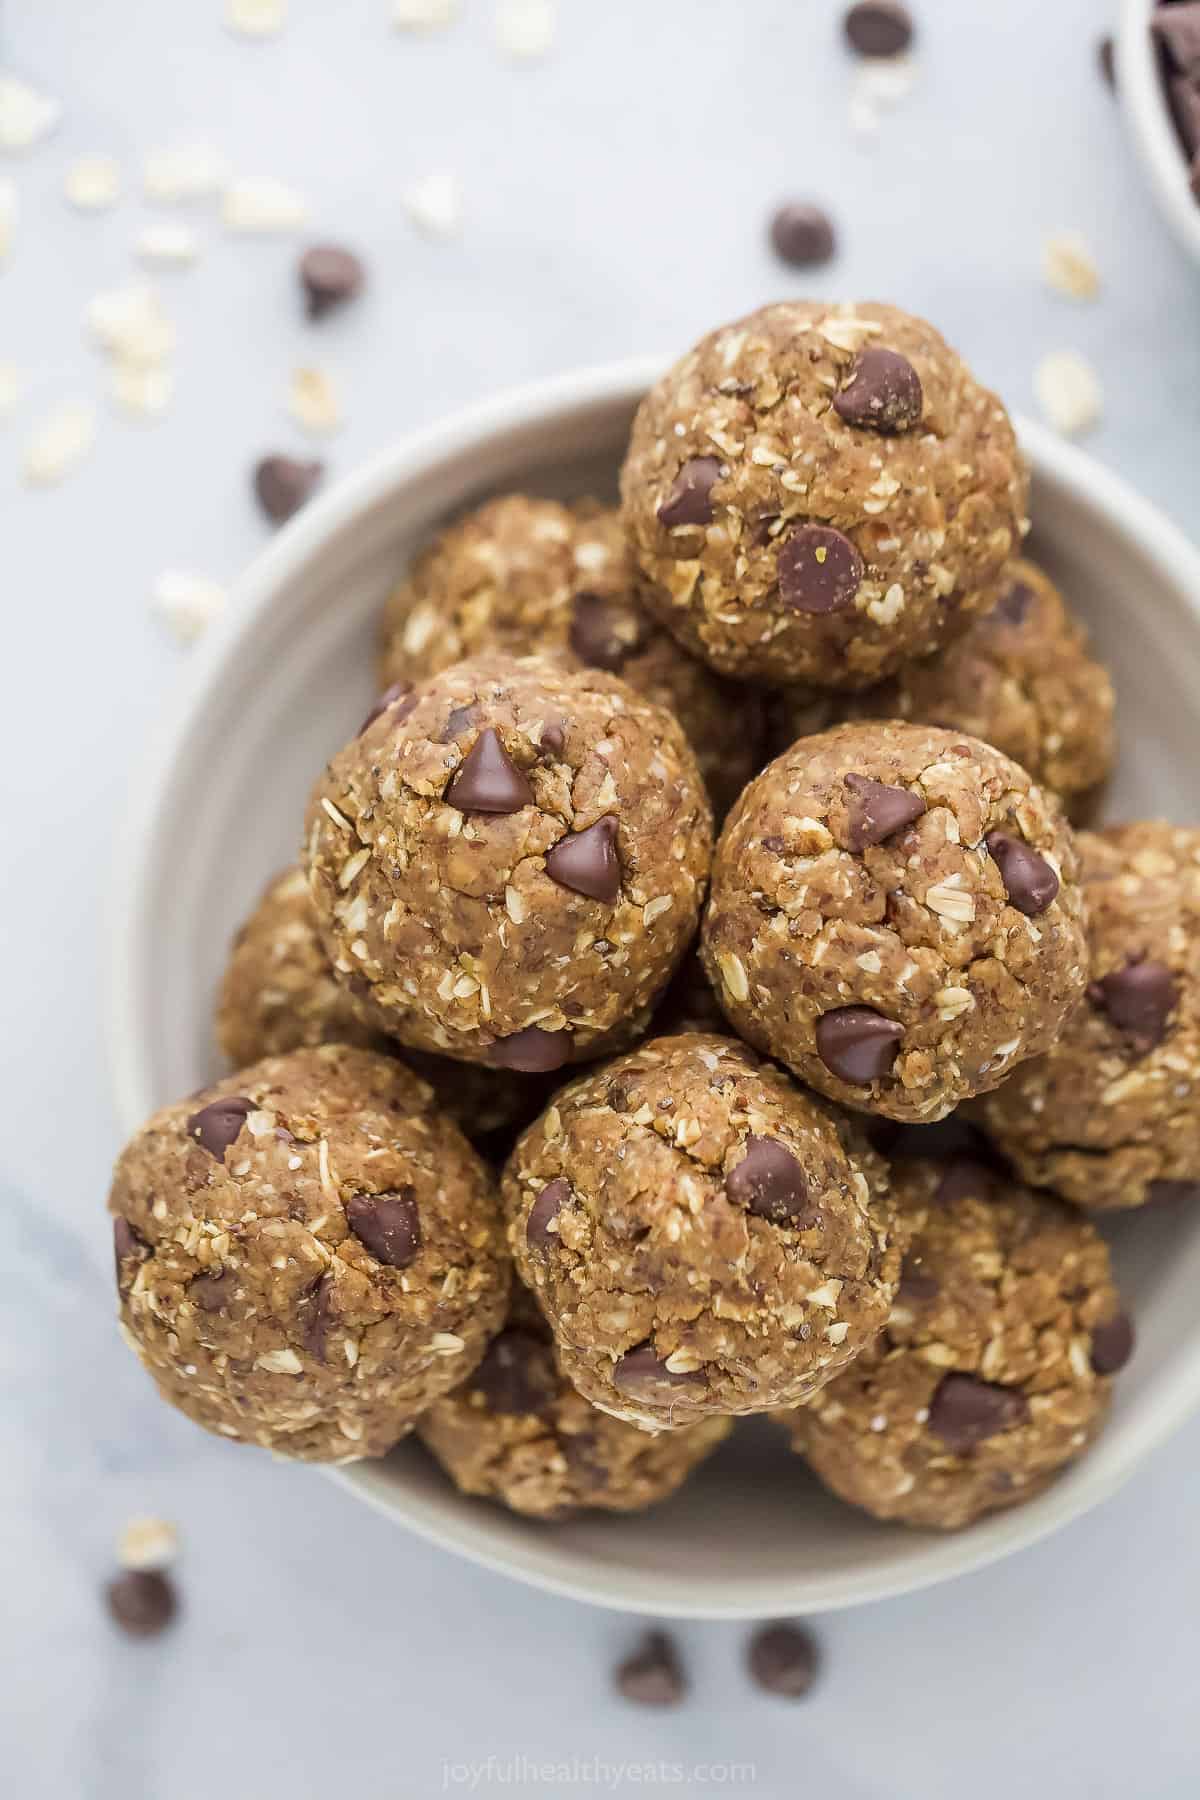 A small white bowl piled high with no-bake chocolate chip energy bites